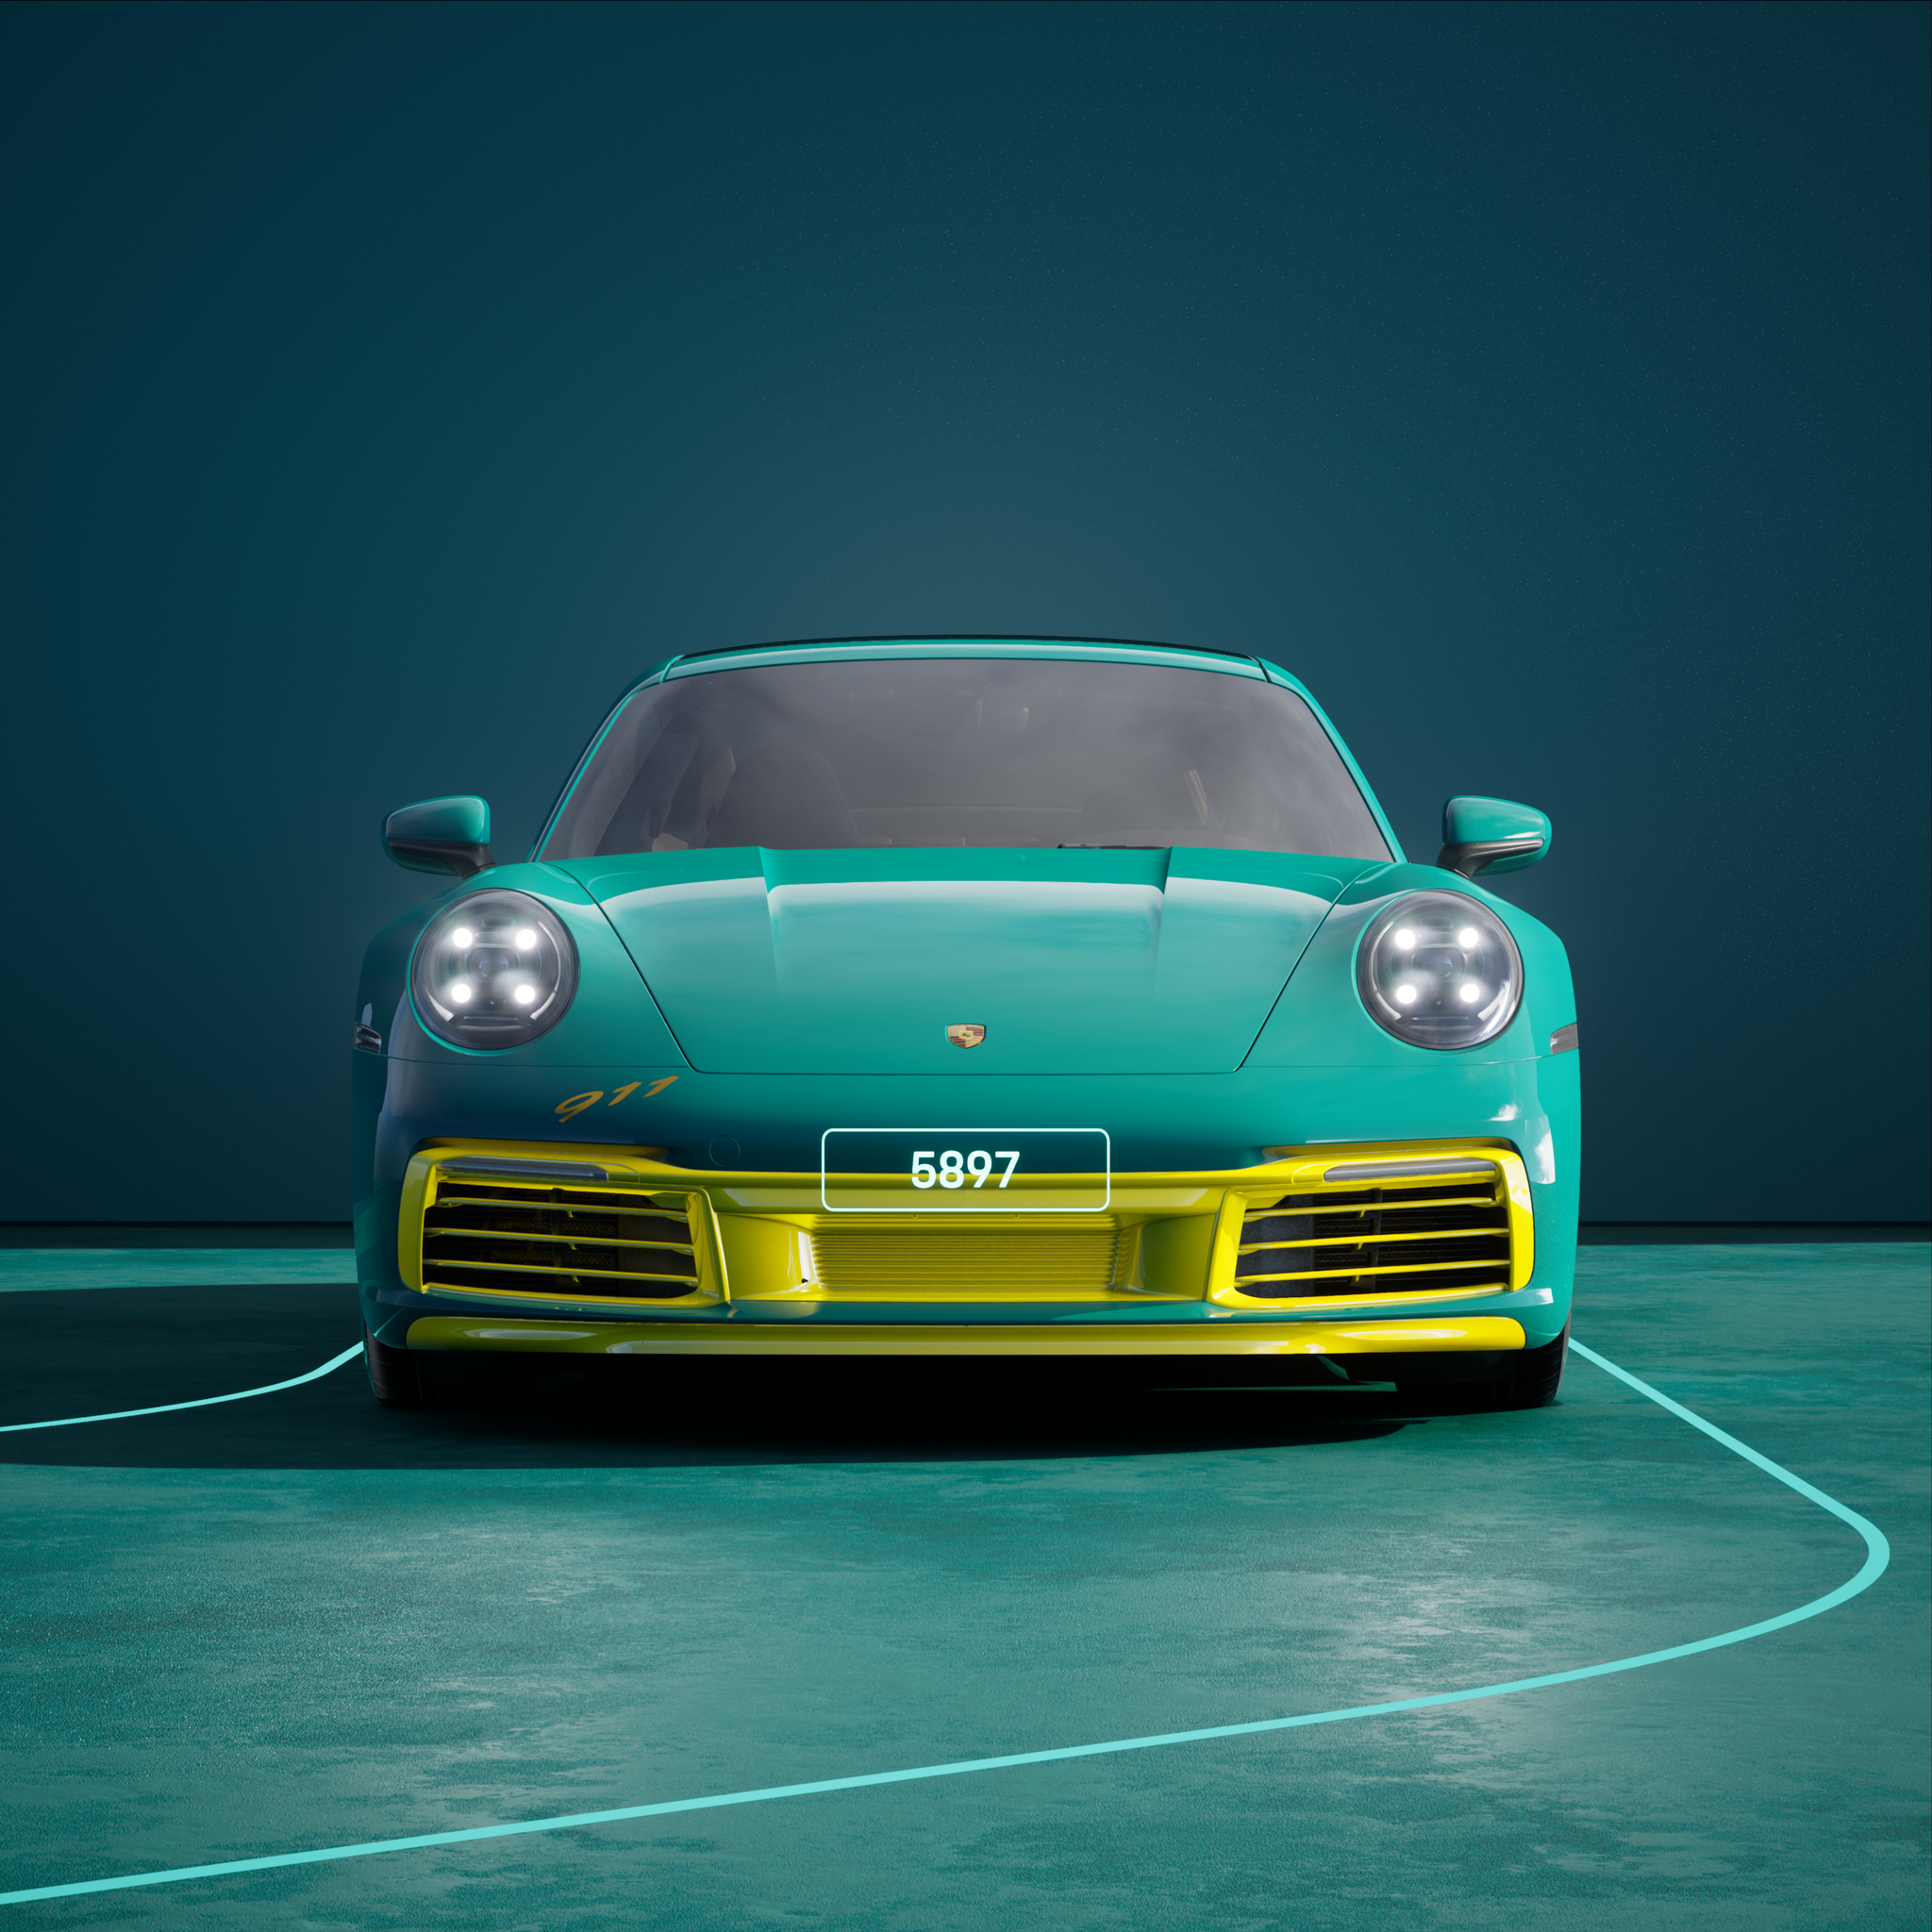 The PORSCHΞ 911 5897 image in phase